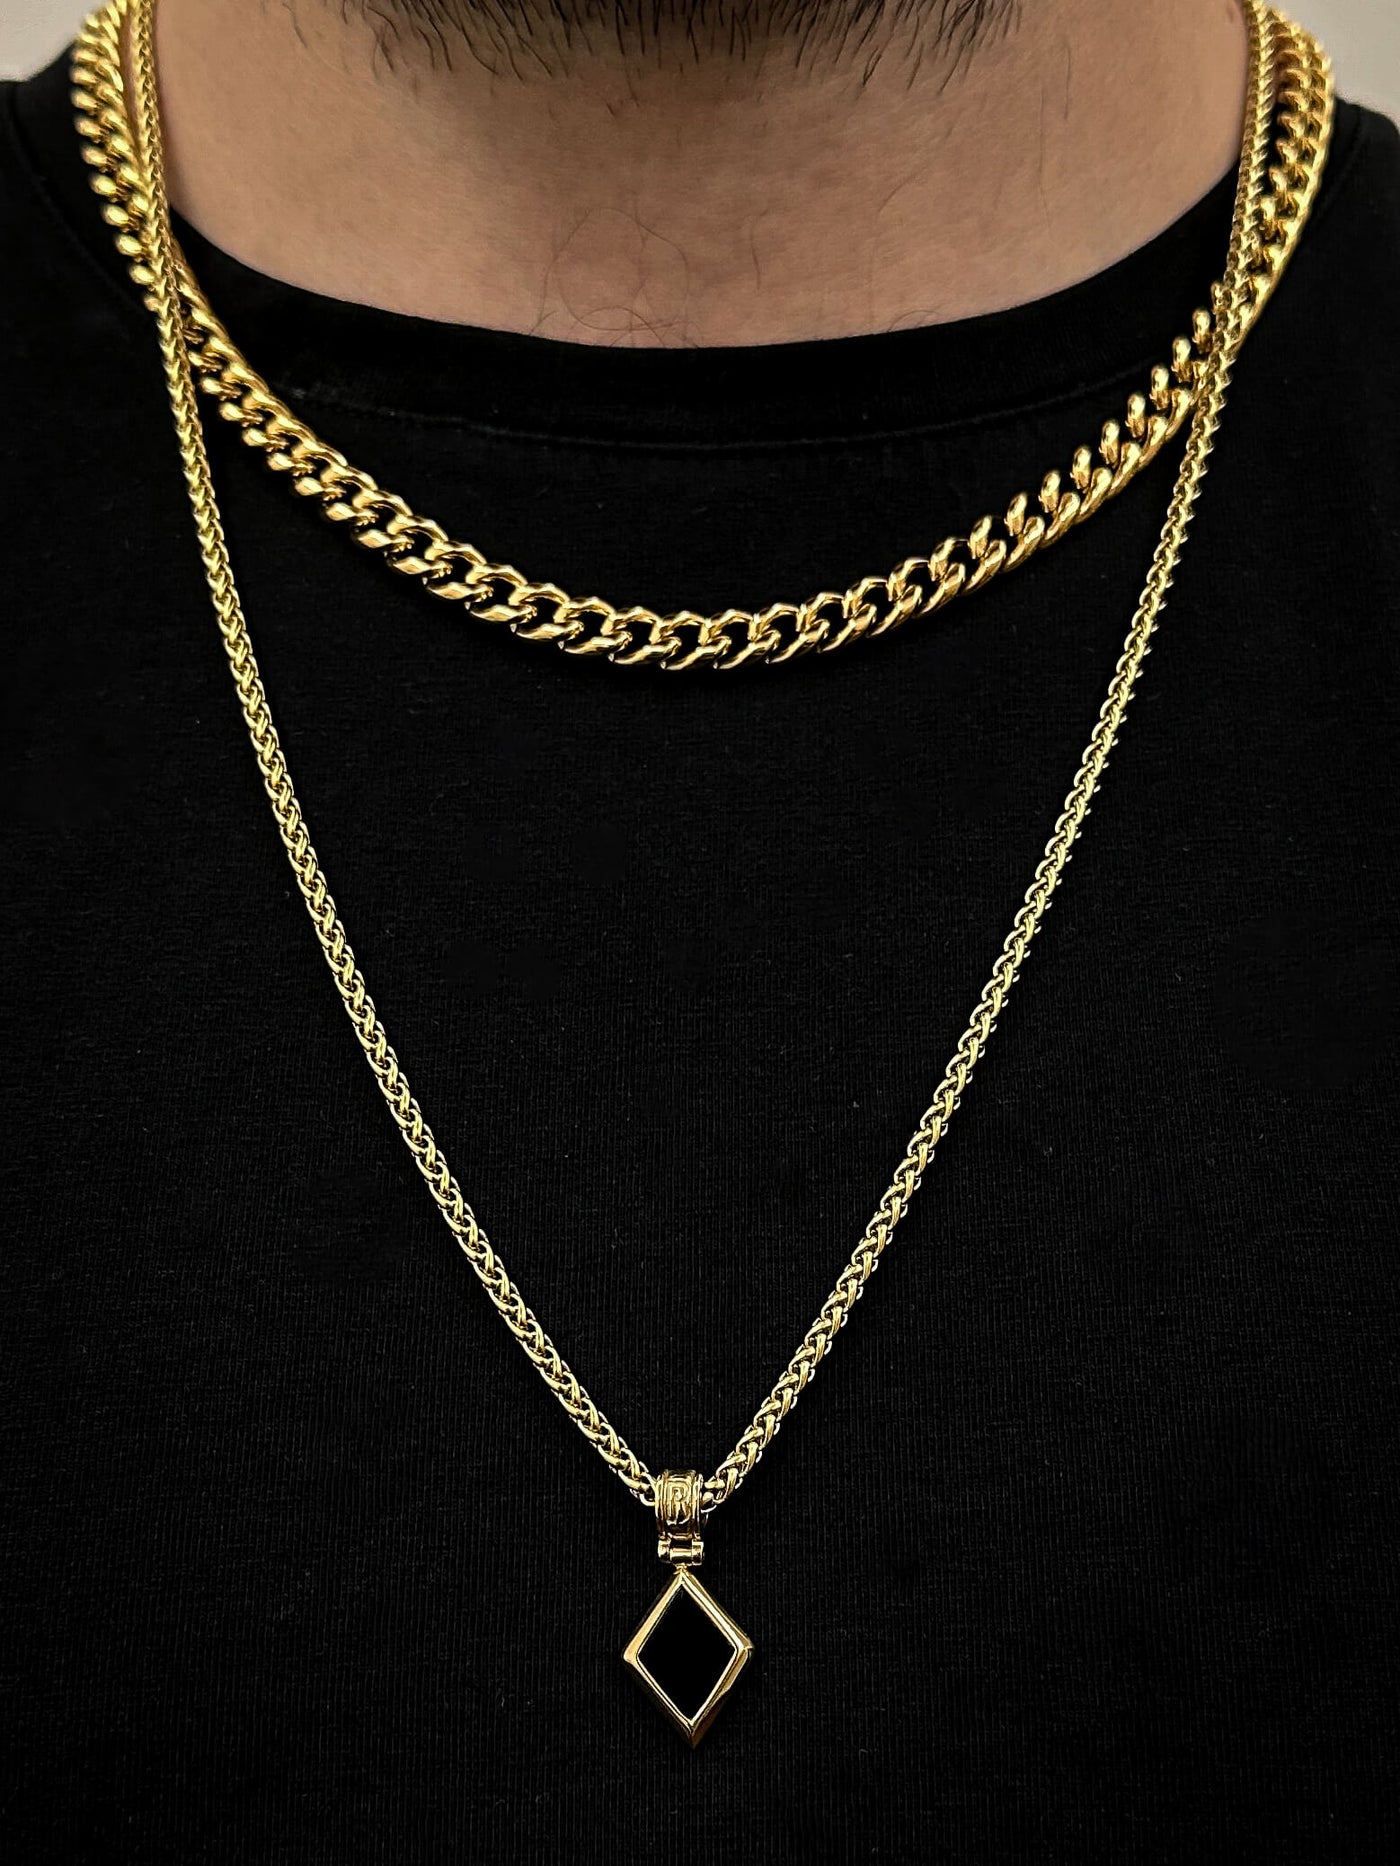 The Gold Plated Onyx Necklace I